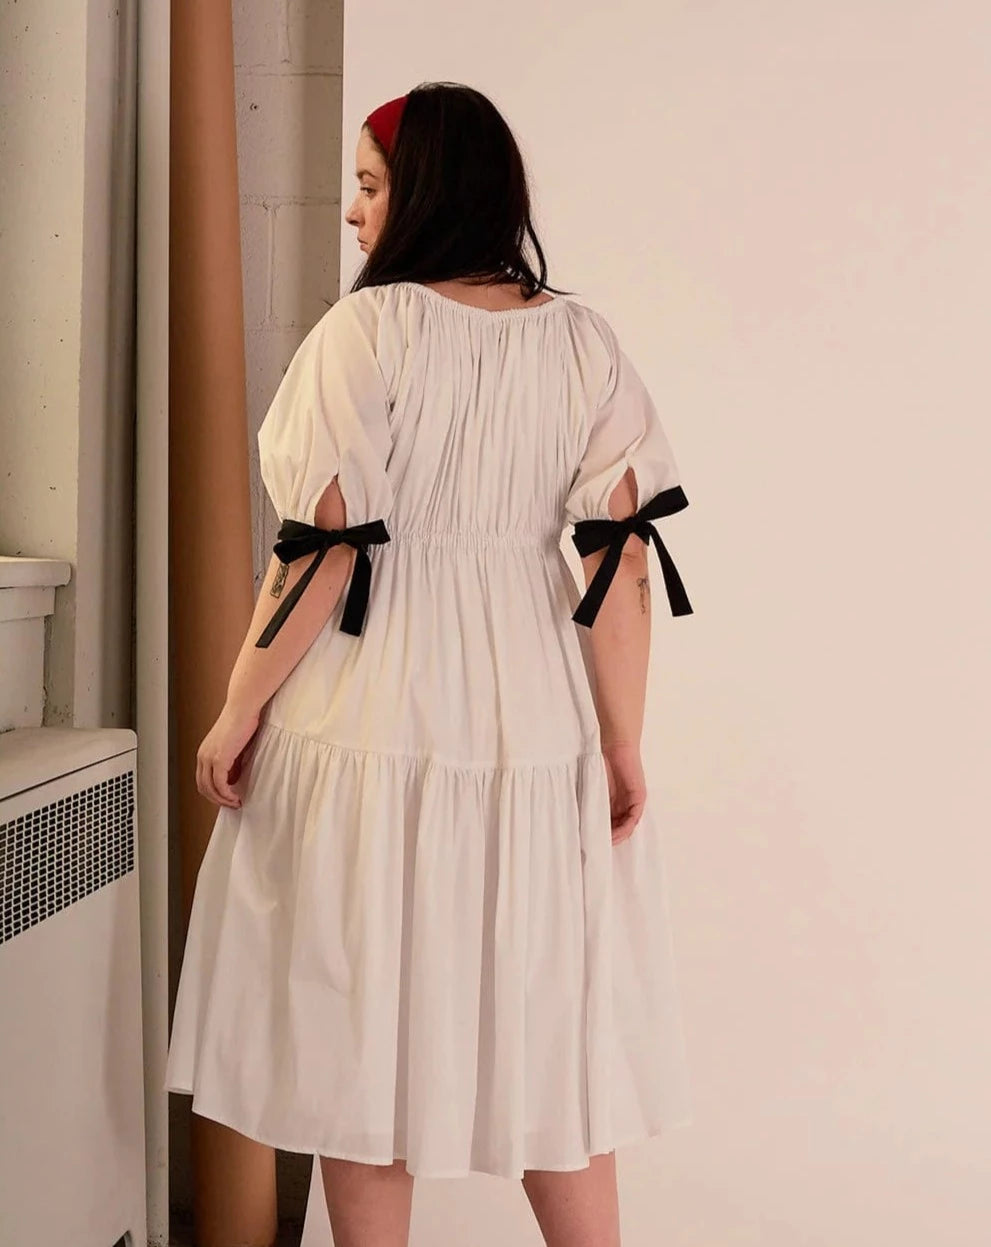 Overall white dress with extra puffy sleeves, gathered tiers, and black bow-tie details, the Jolen dress is both elegant and incredibly comfortable too. It's fully lined with cotton, slips on easily over head, and has pockets. 